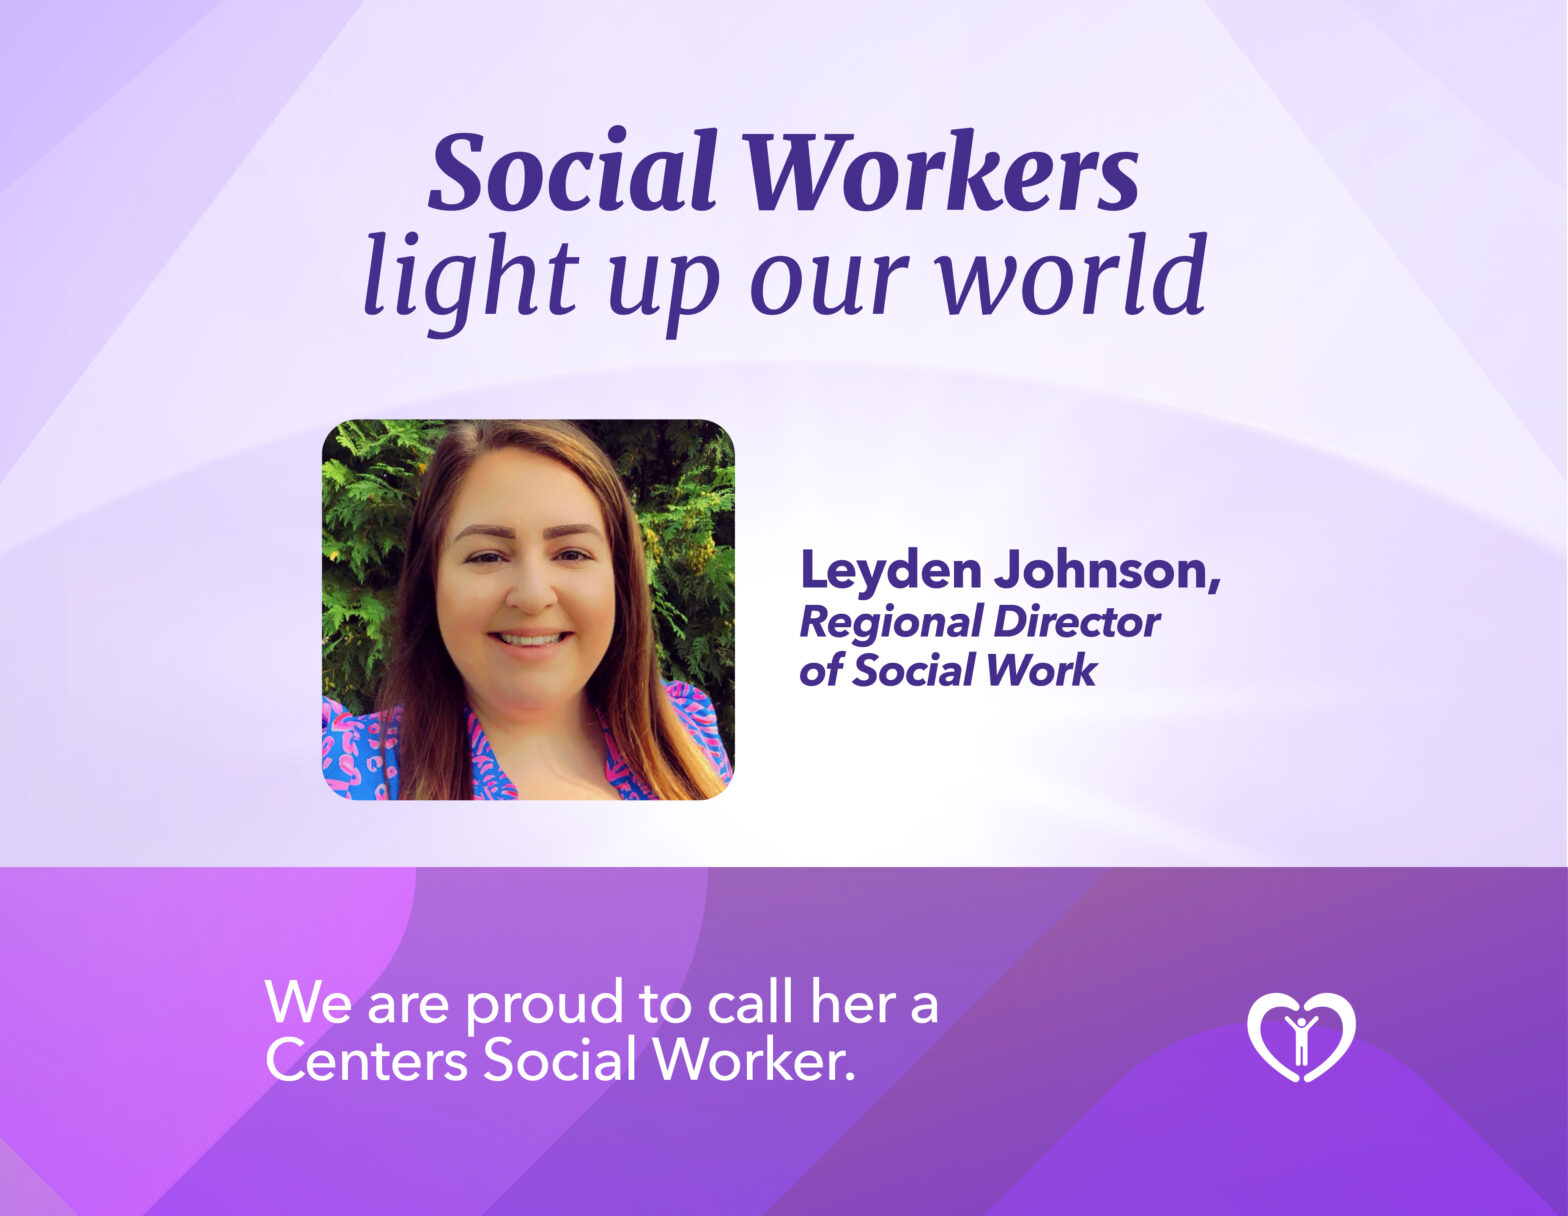 Social Workers light up our world